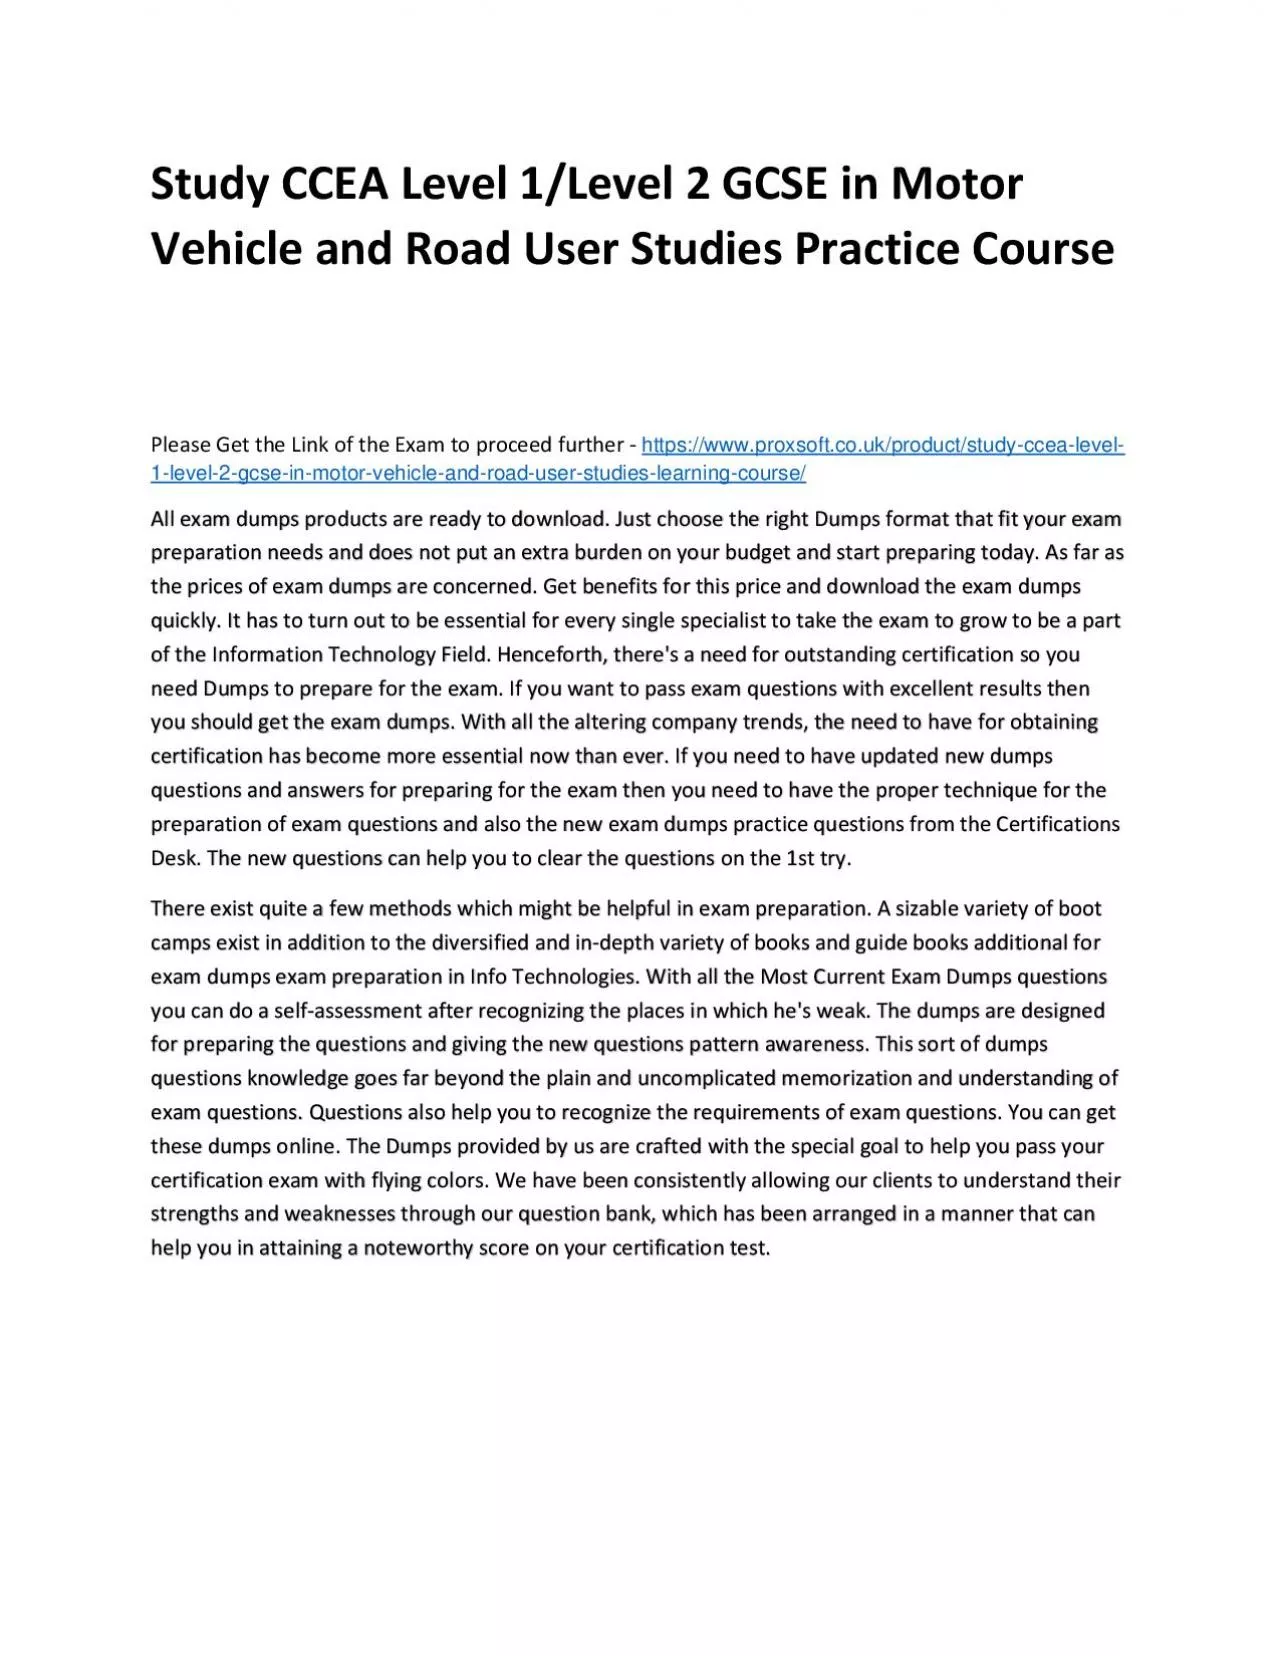 Study CCEA Level 1/Level 2 GCSE in Motor Vehicle and Road User Studies Practice Course